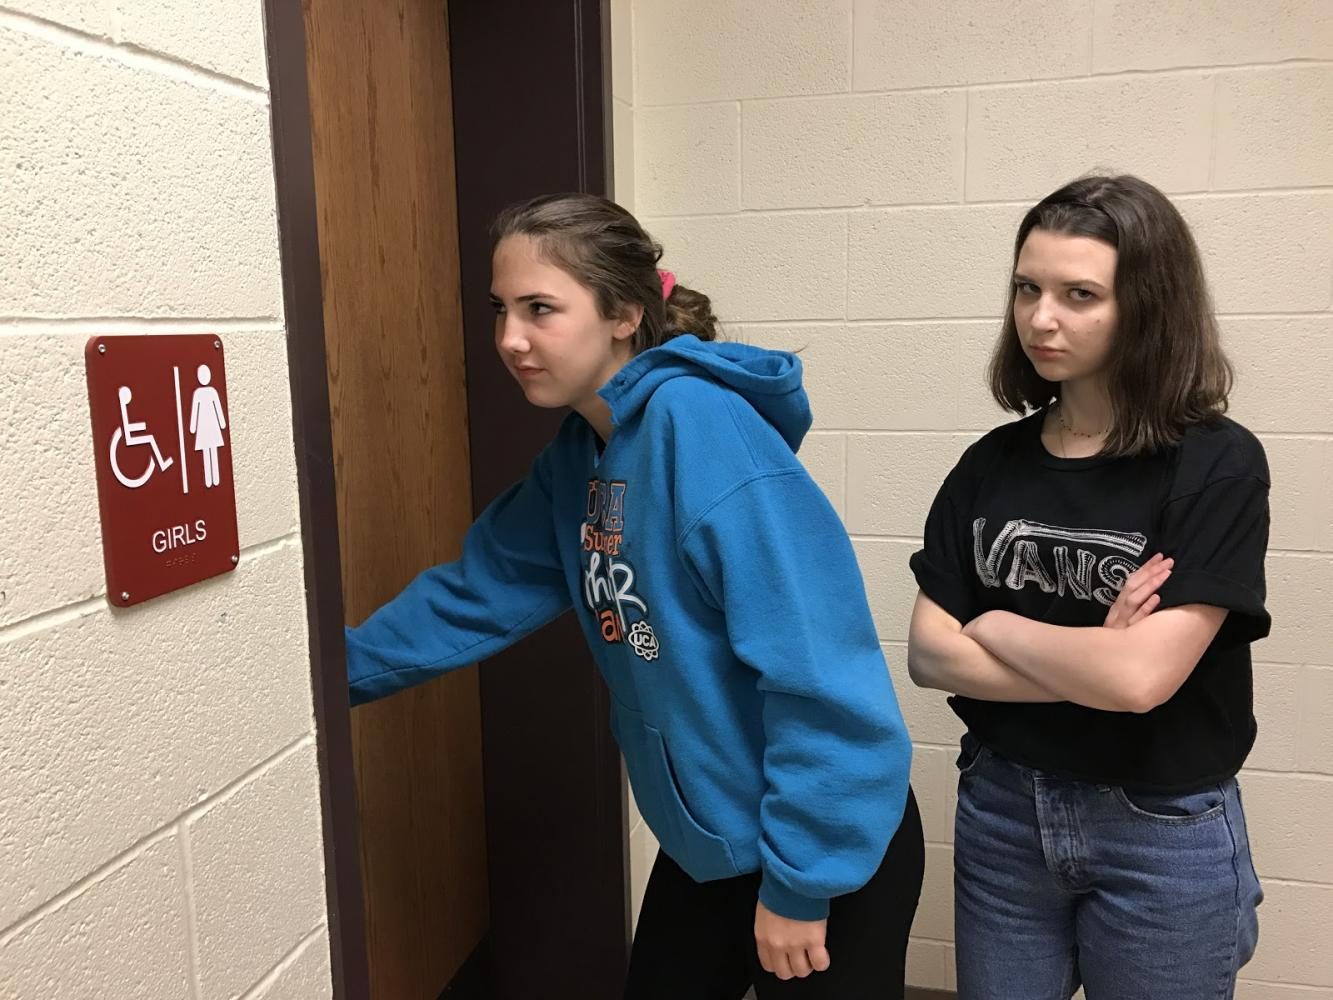 Daisy Tahan and Alexa Miceli try to use the bathroom in the science wing. They had to search for another bathroom because these are locked.